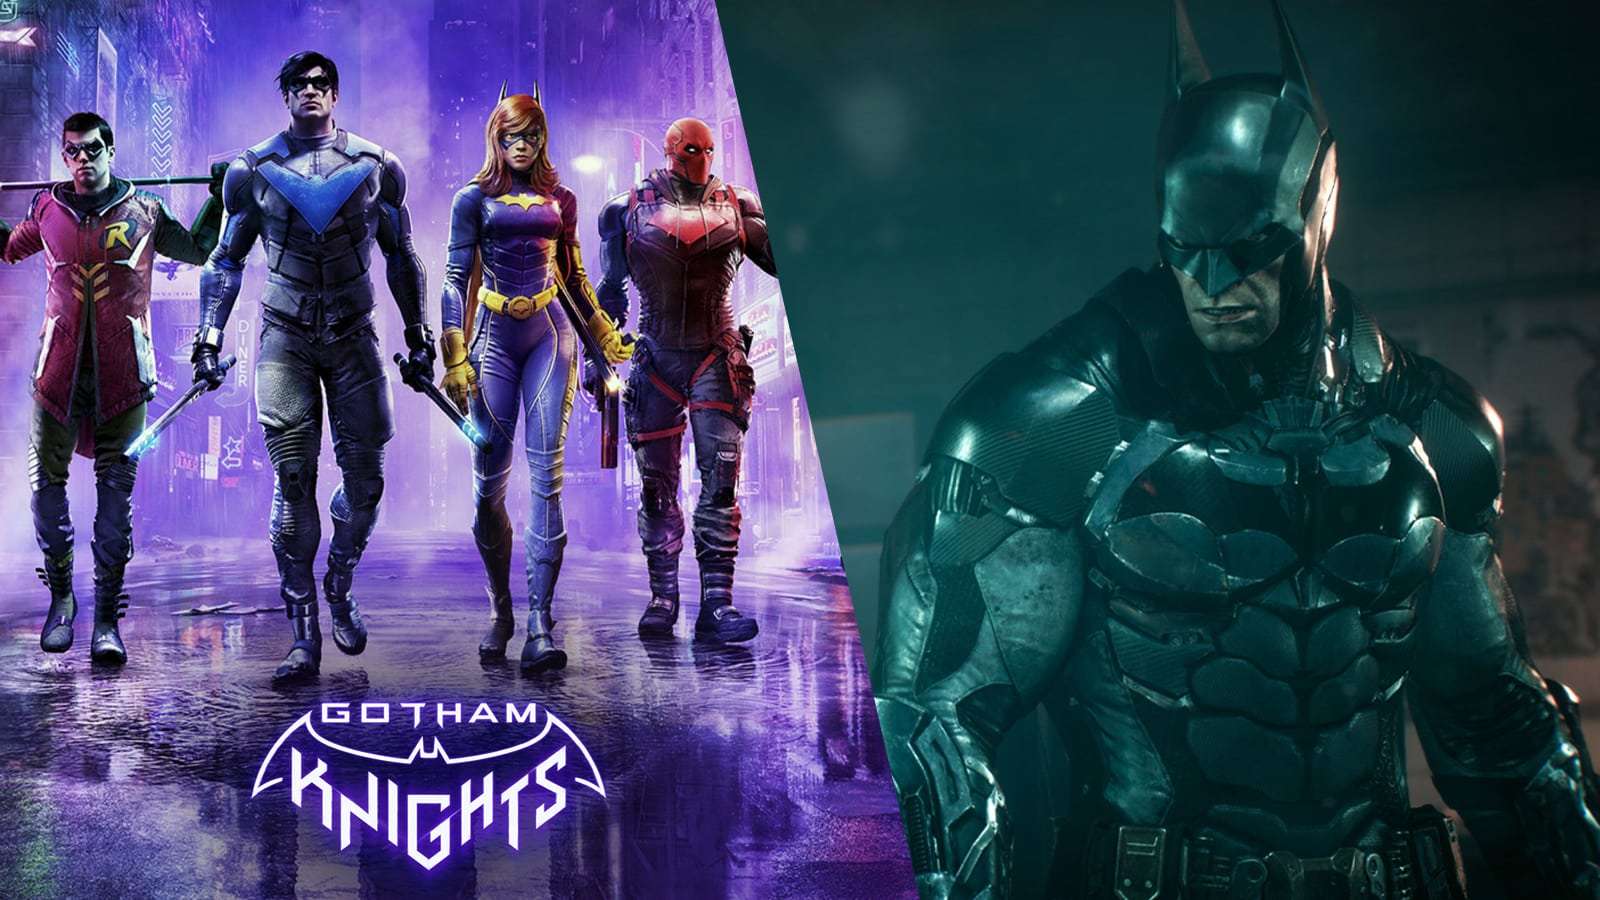 Connection between Gotham Knights and Arkhamverse as confirmed by Warner Bros. Games